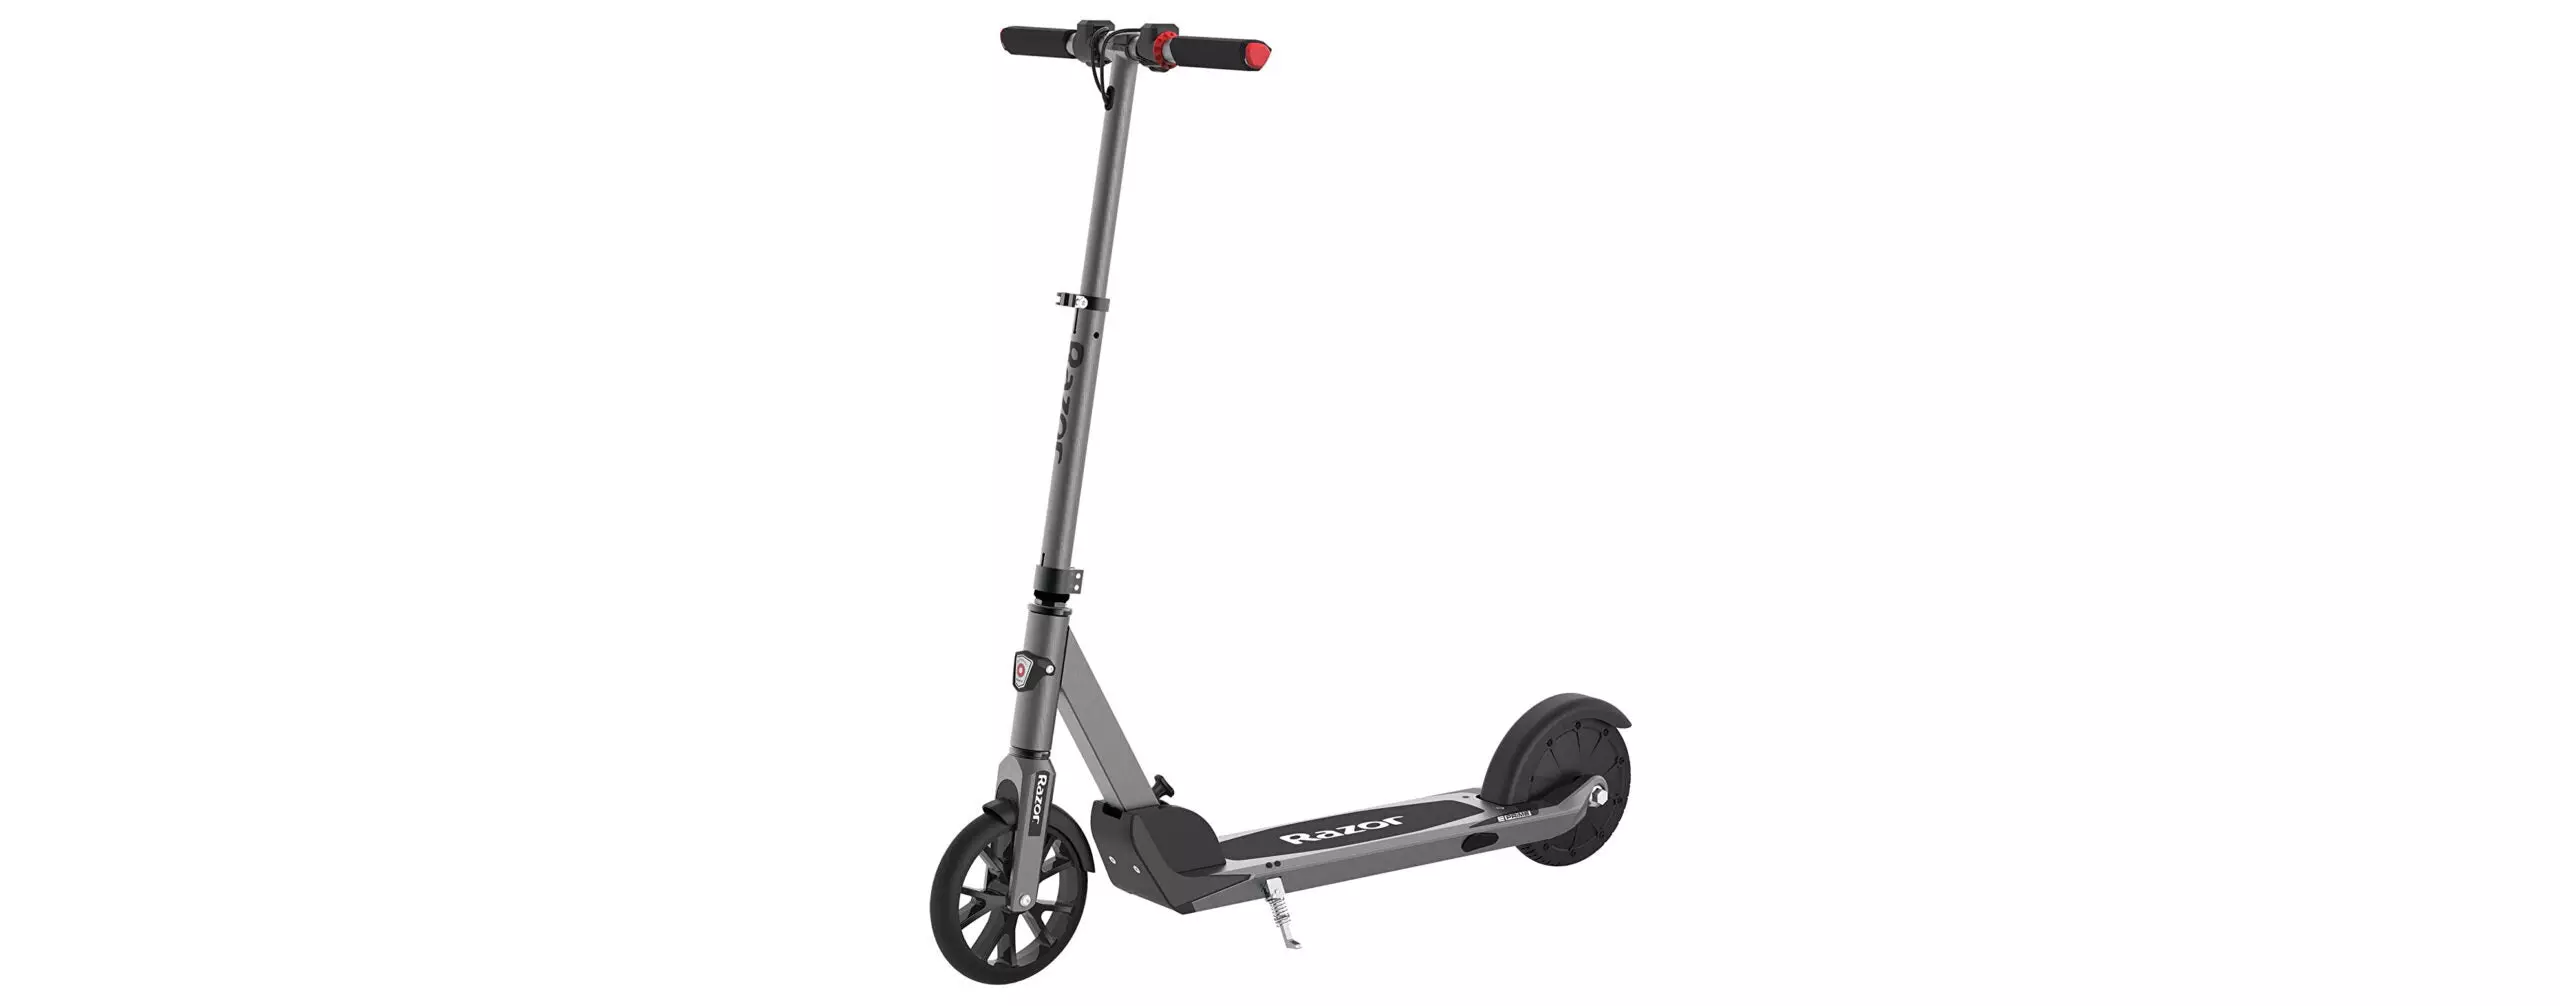 The Best Razor Electric Scooters (Review & Buying Guide) in 2021